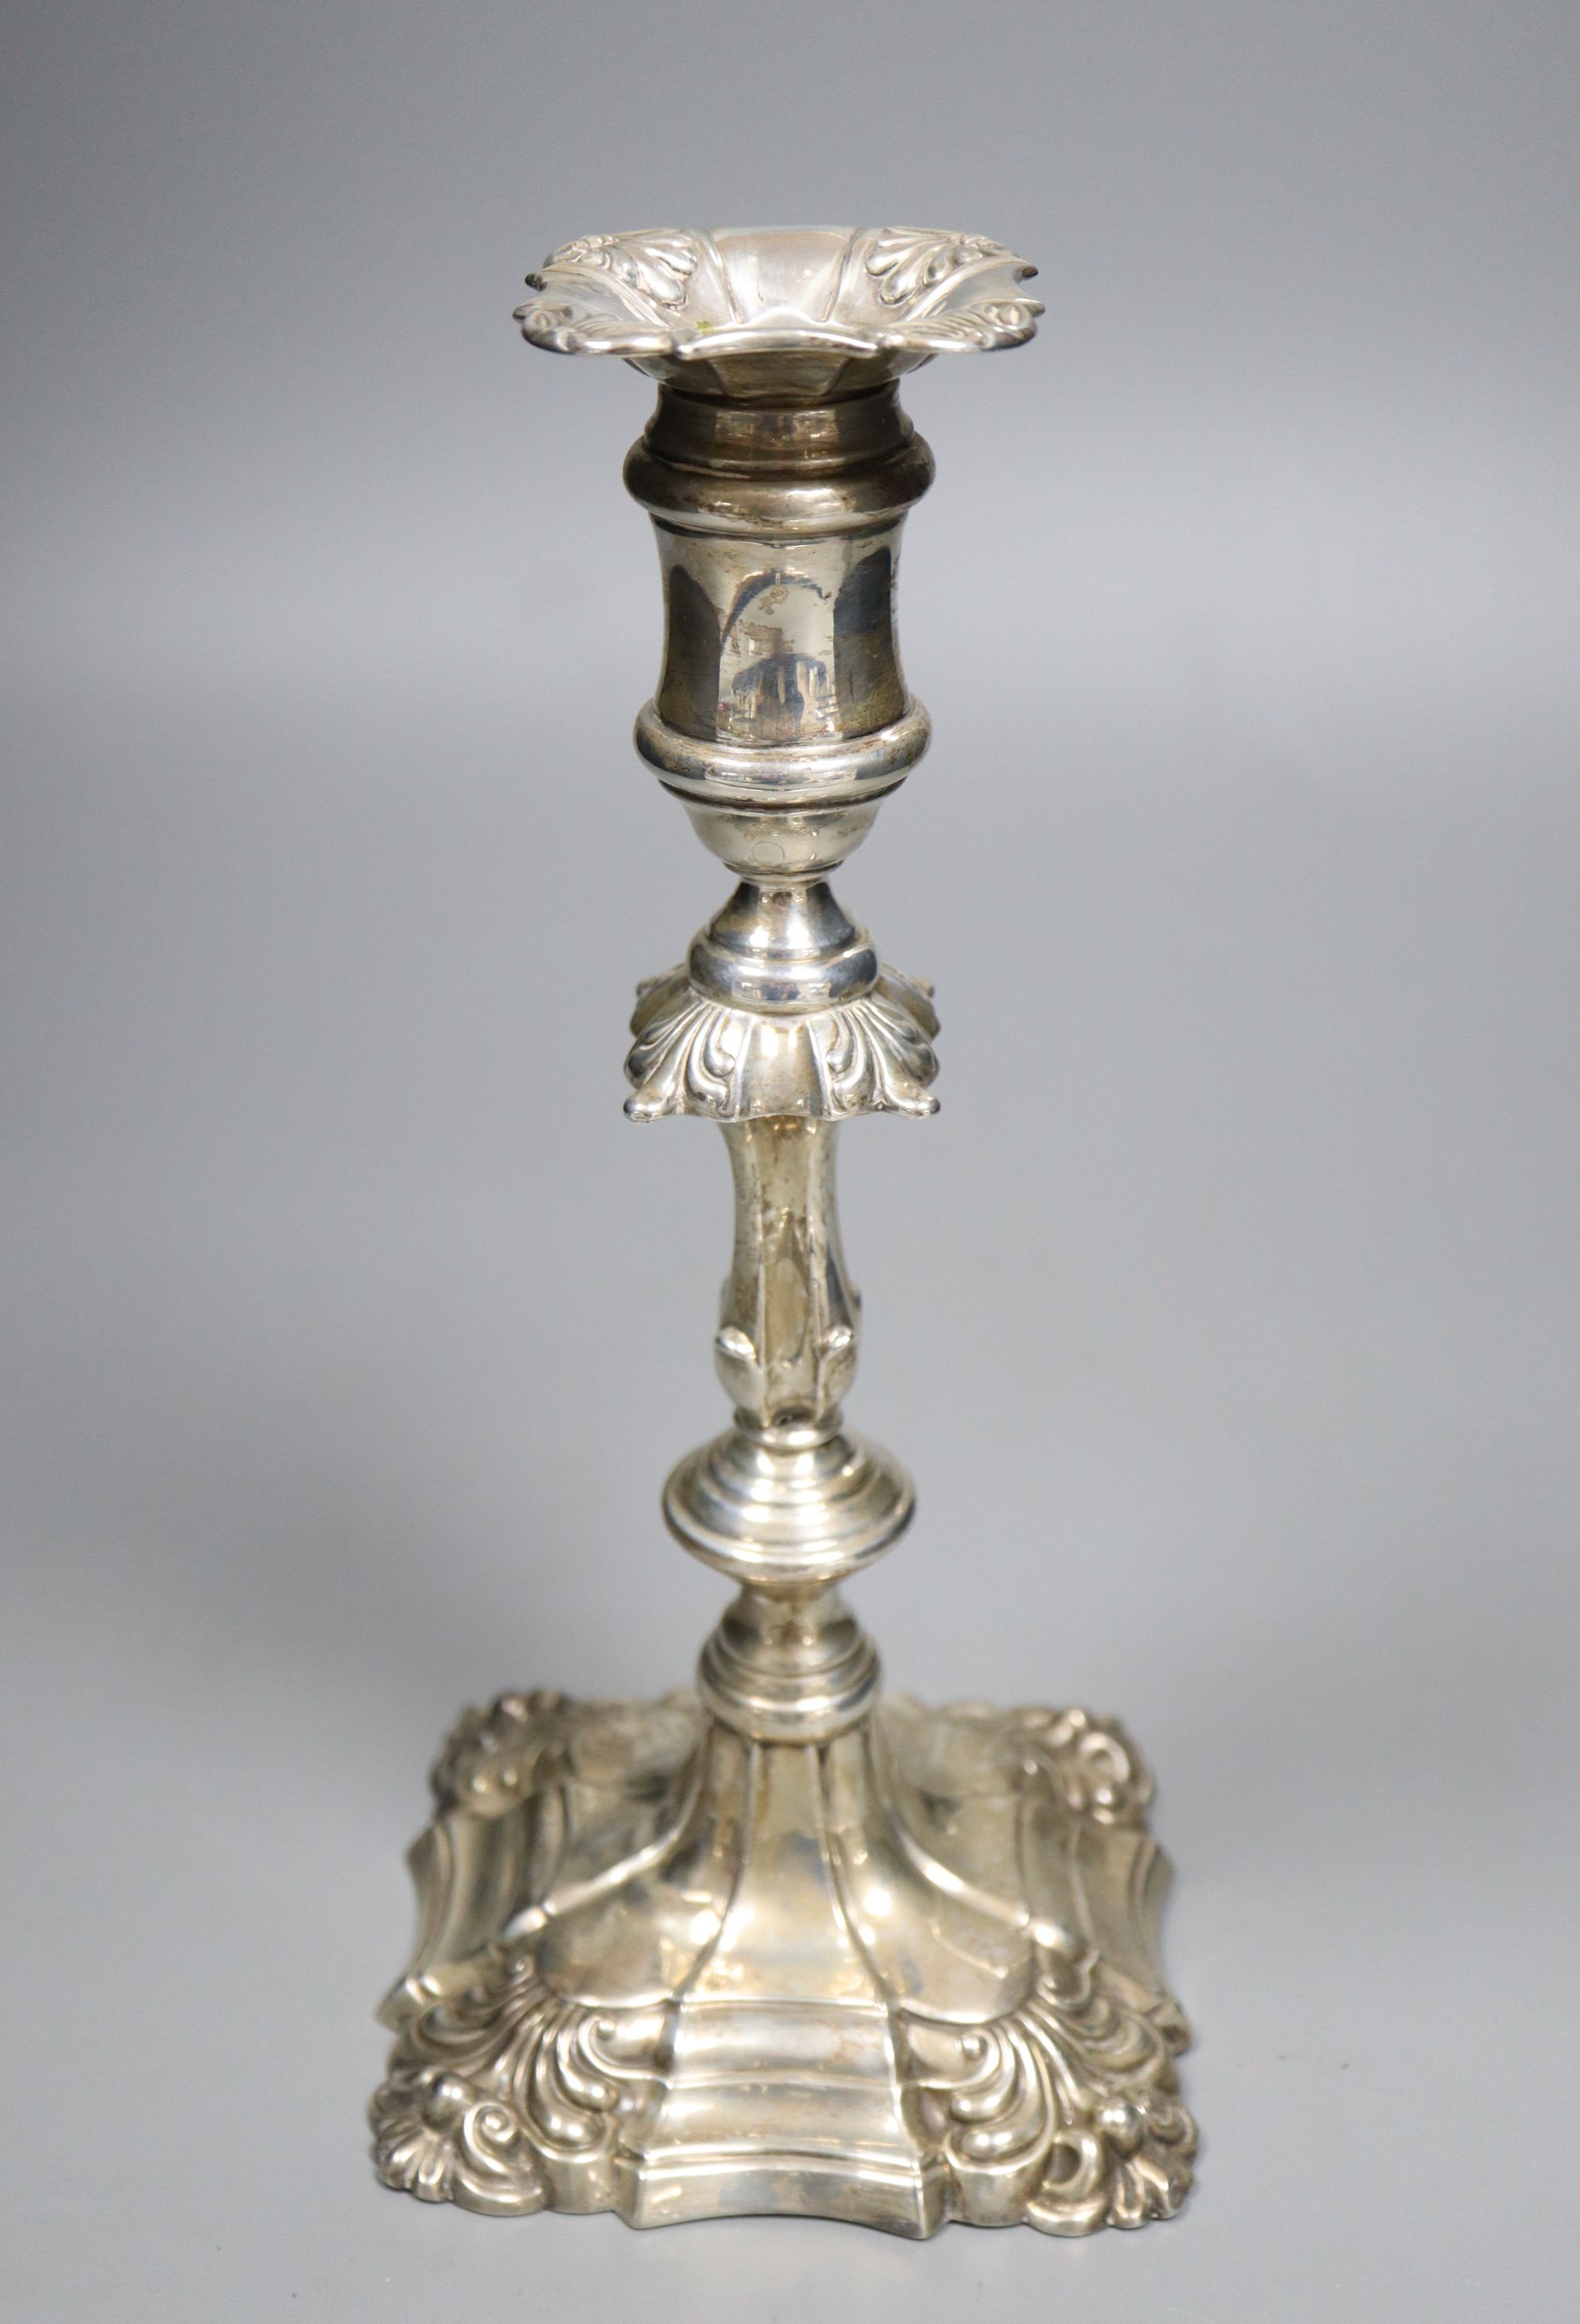 A late Victorian George III style silver candlestick, I.S. Greenburg & Co, Birmingham, 1900, weighted, 23.5cm.